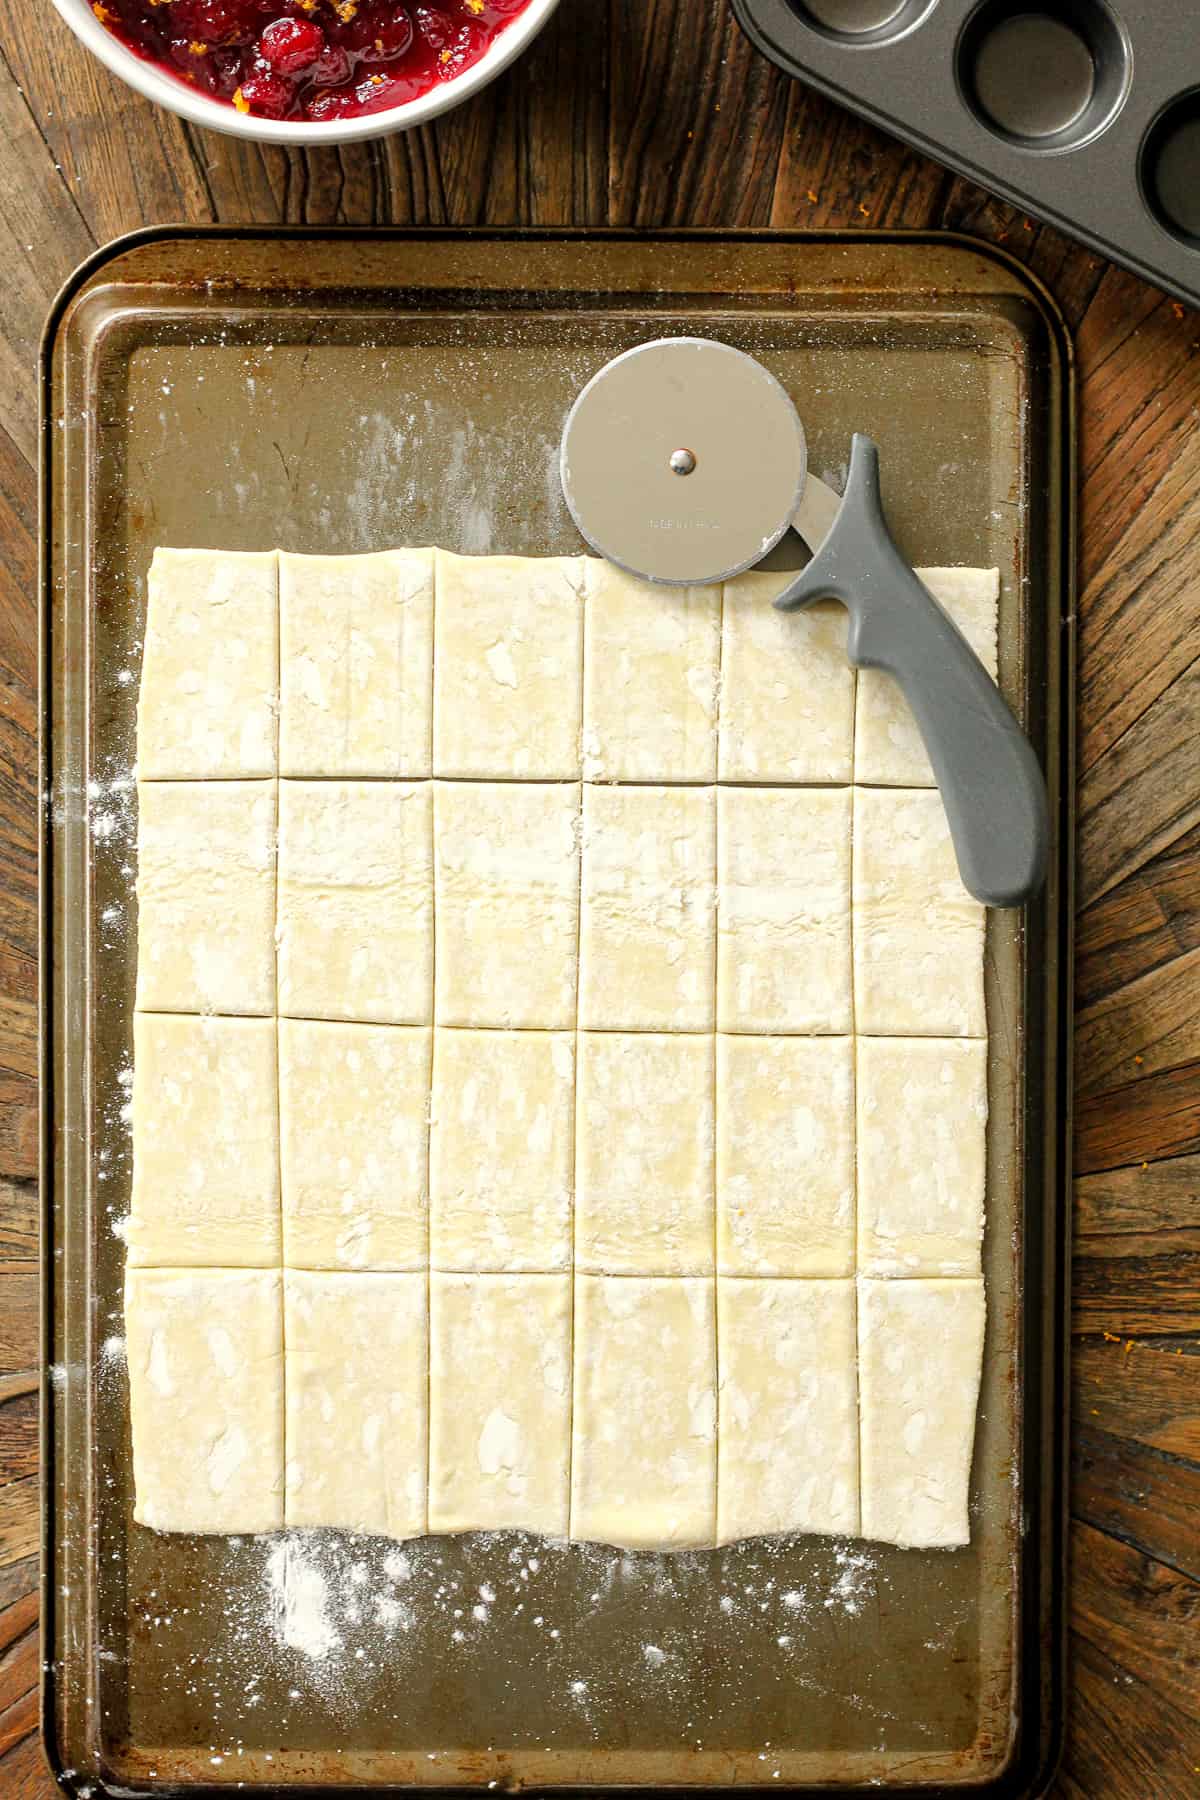 The puff pastry rolled out and cut into rectangles.